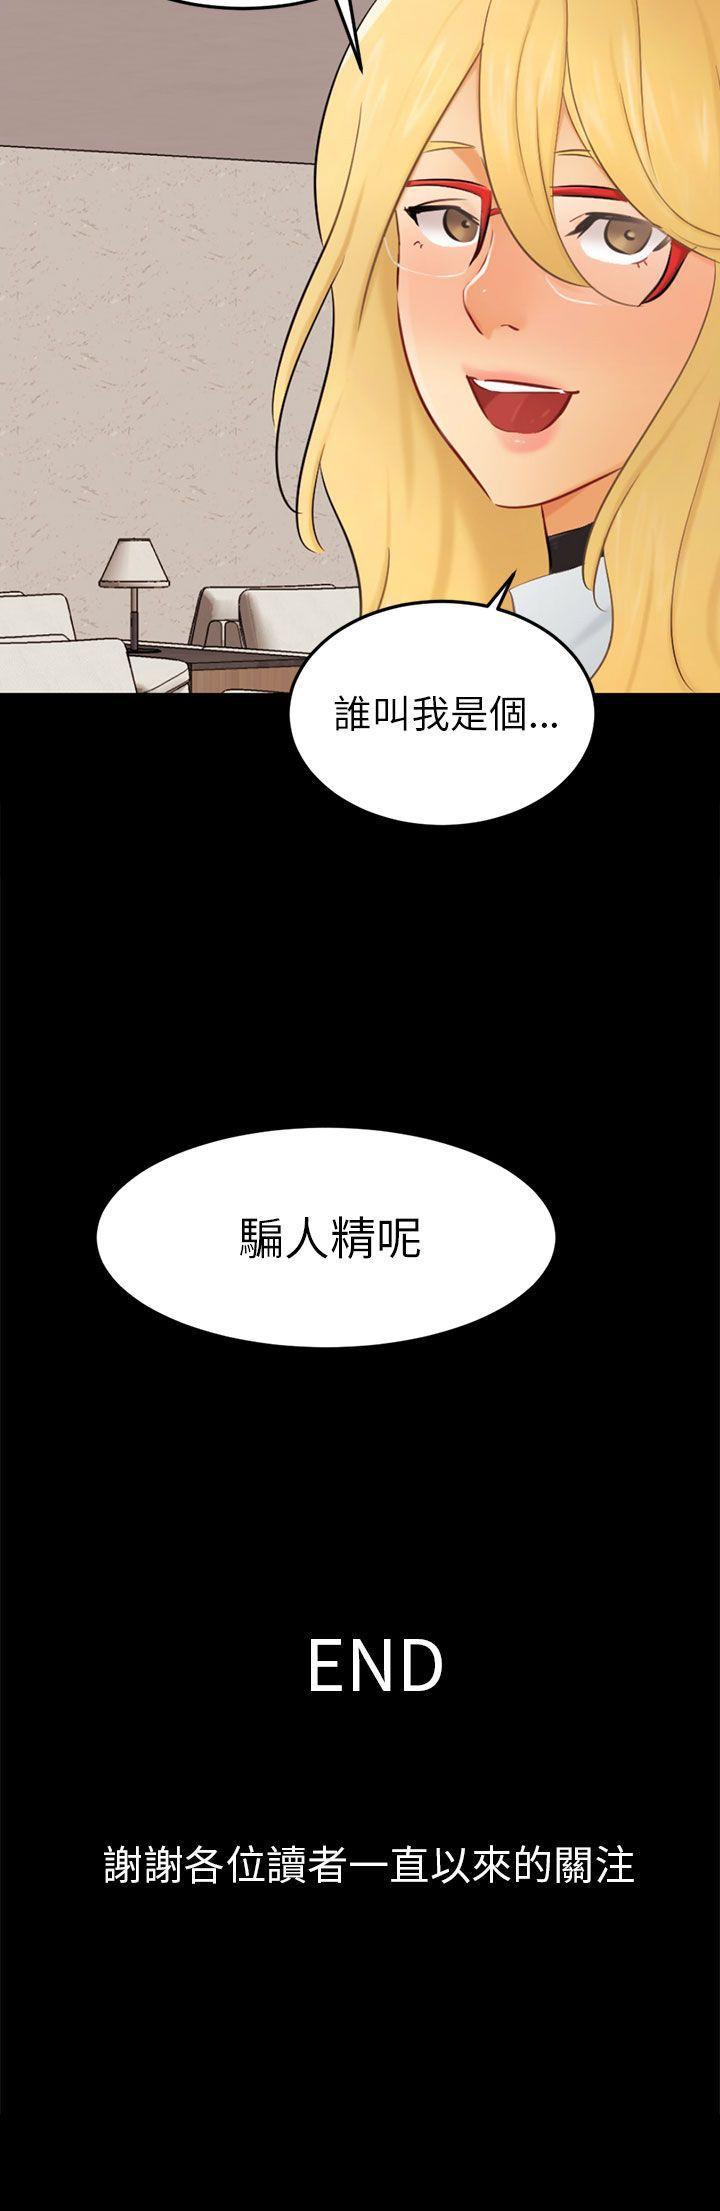 Dyke 騙局 Amatures Gone Wild - Page 723